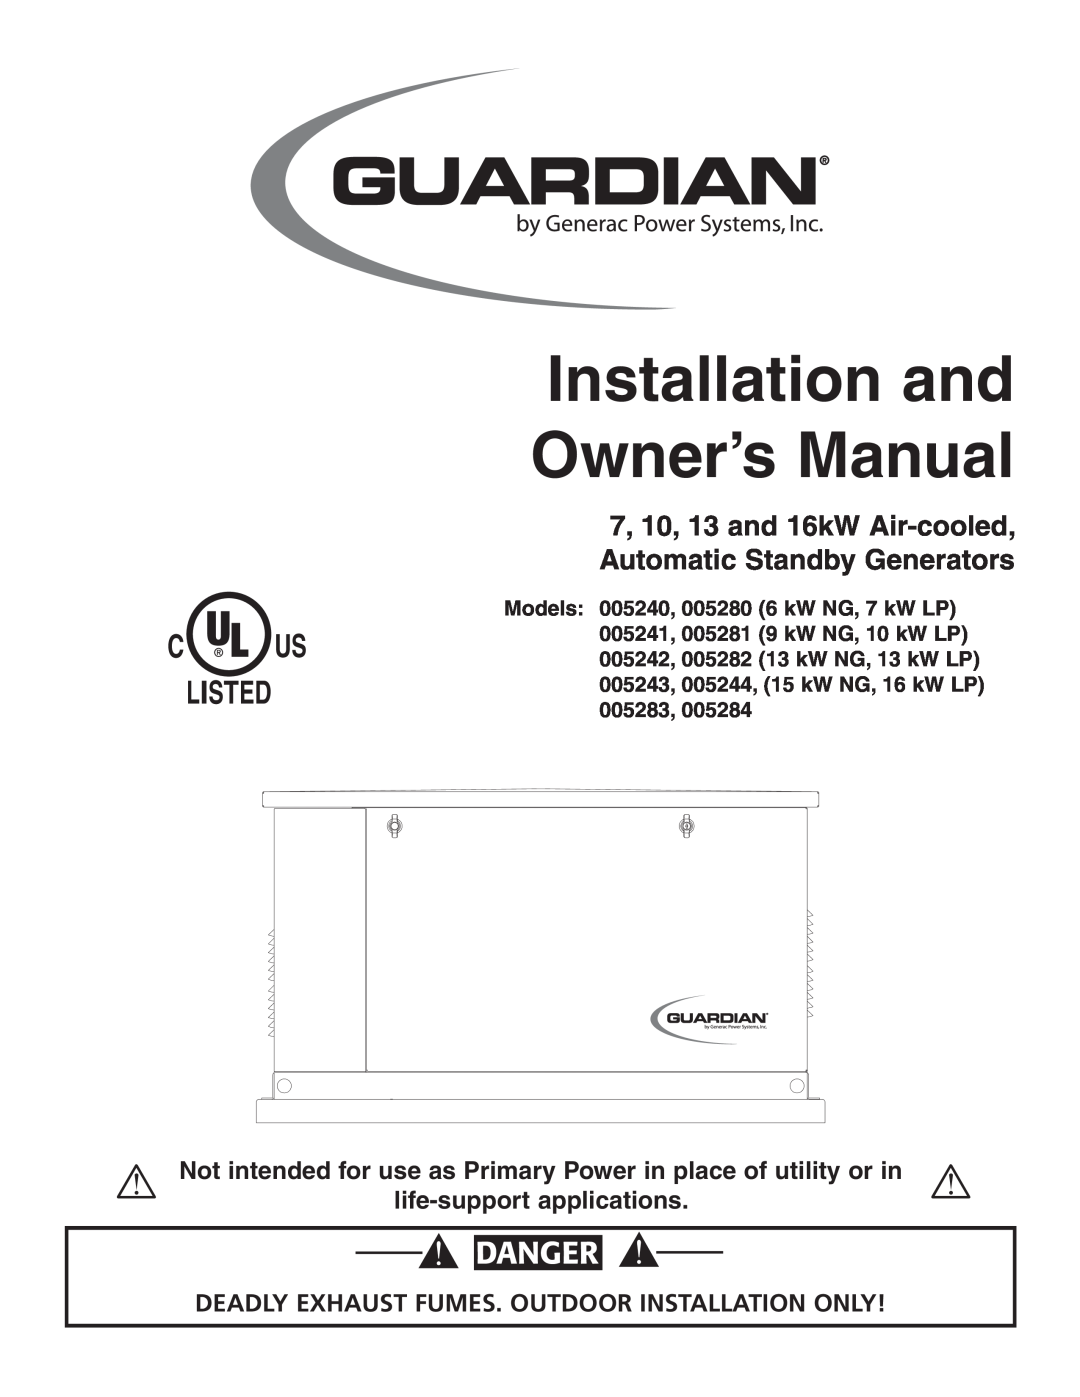 Guardian Technologies 005282 owner manual Installation and Owner’s Manual, C Us Listed, Danger, life-supportapplications 